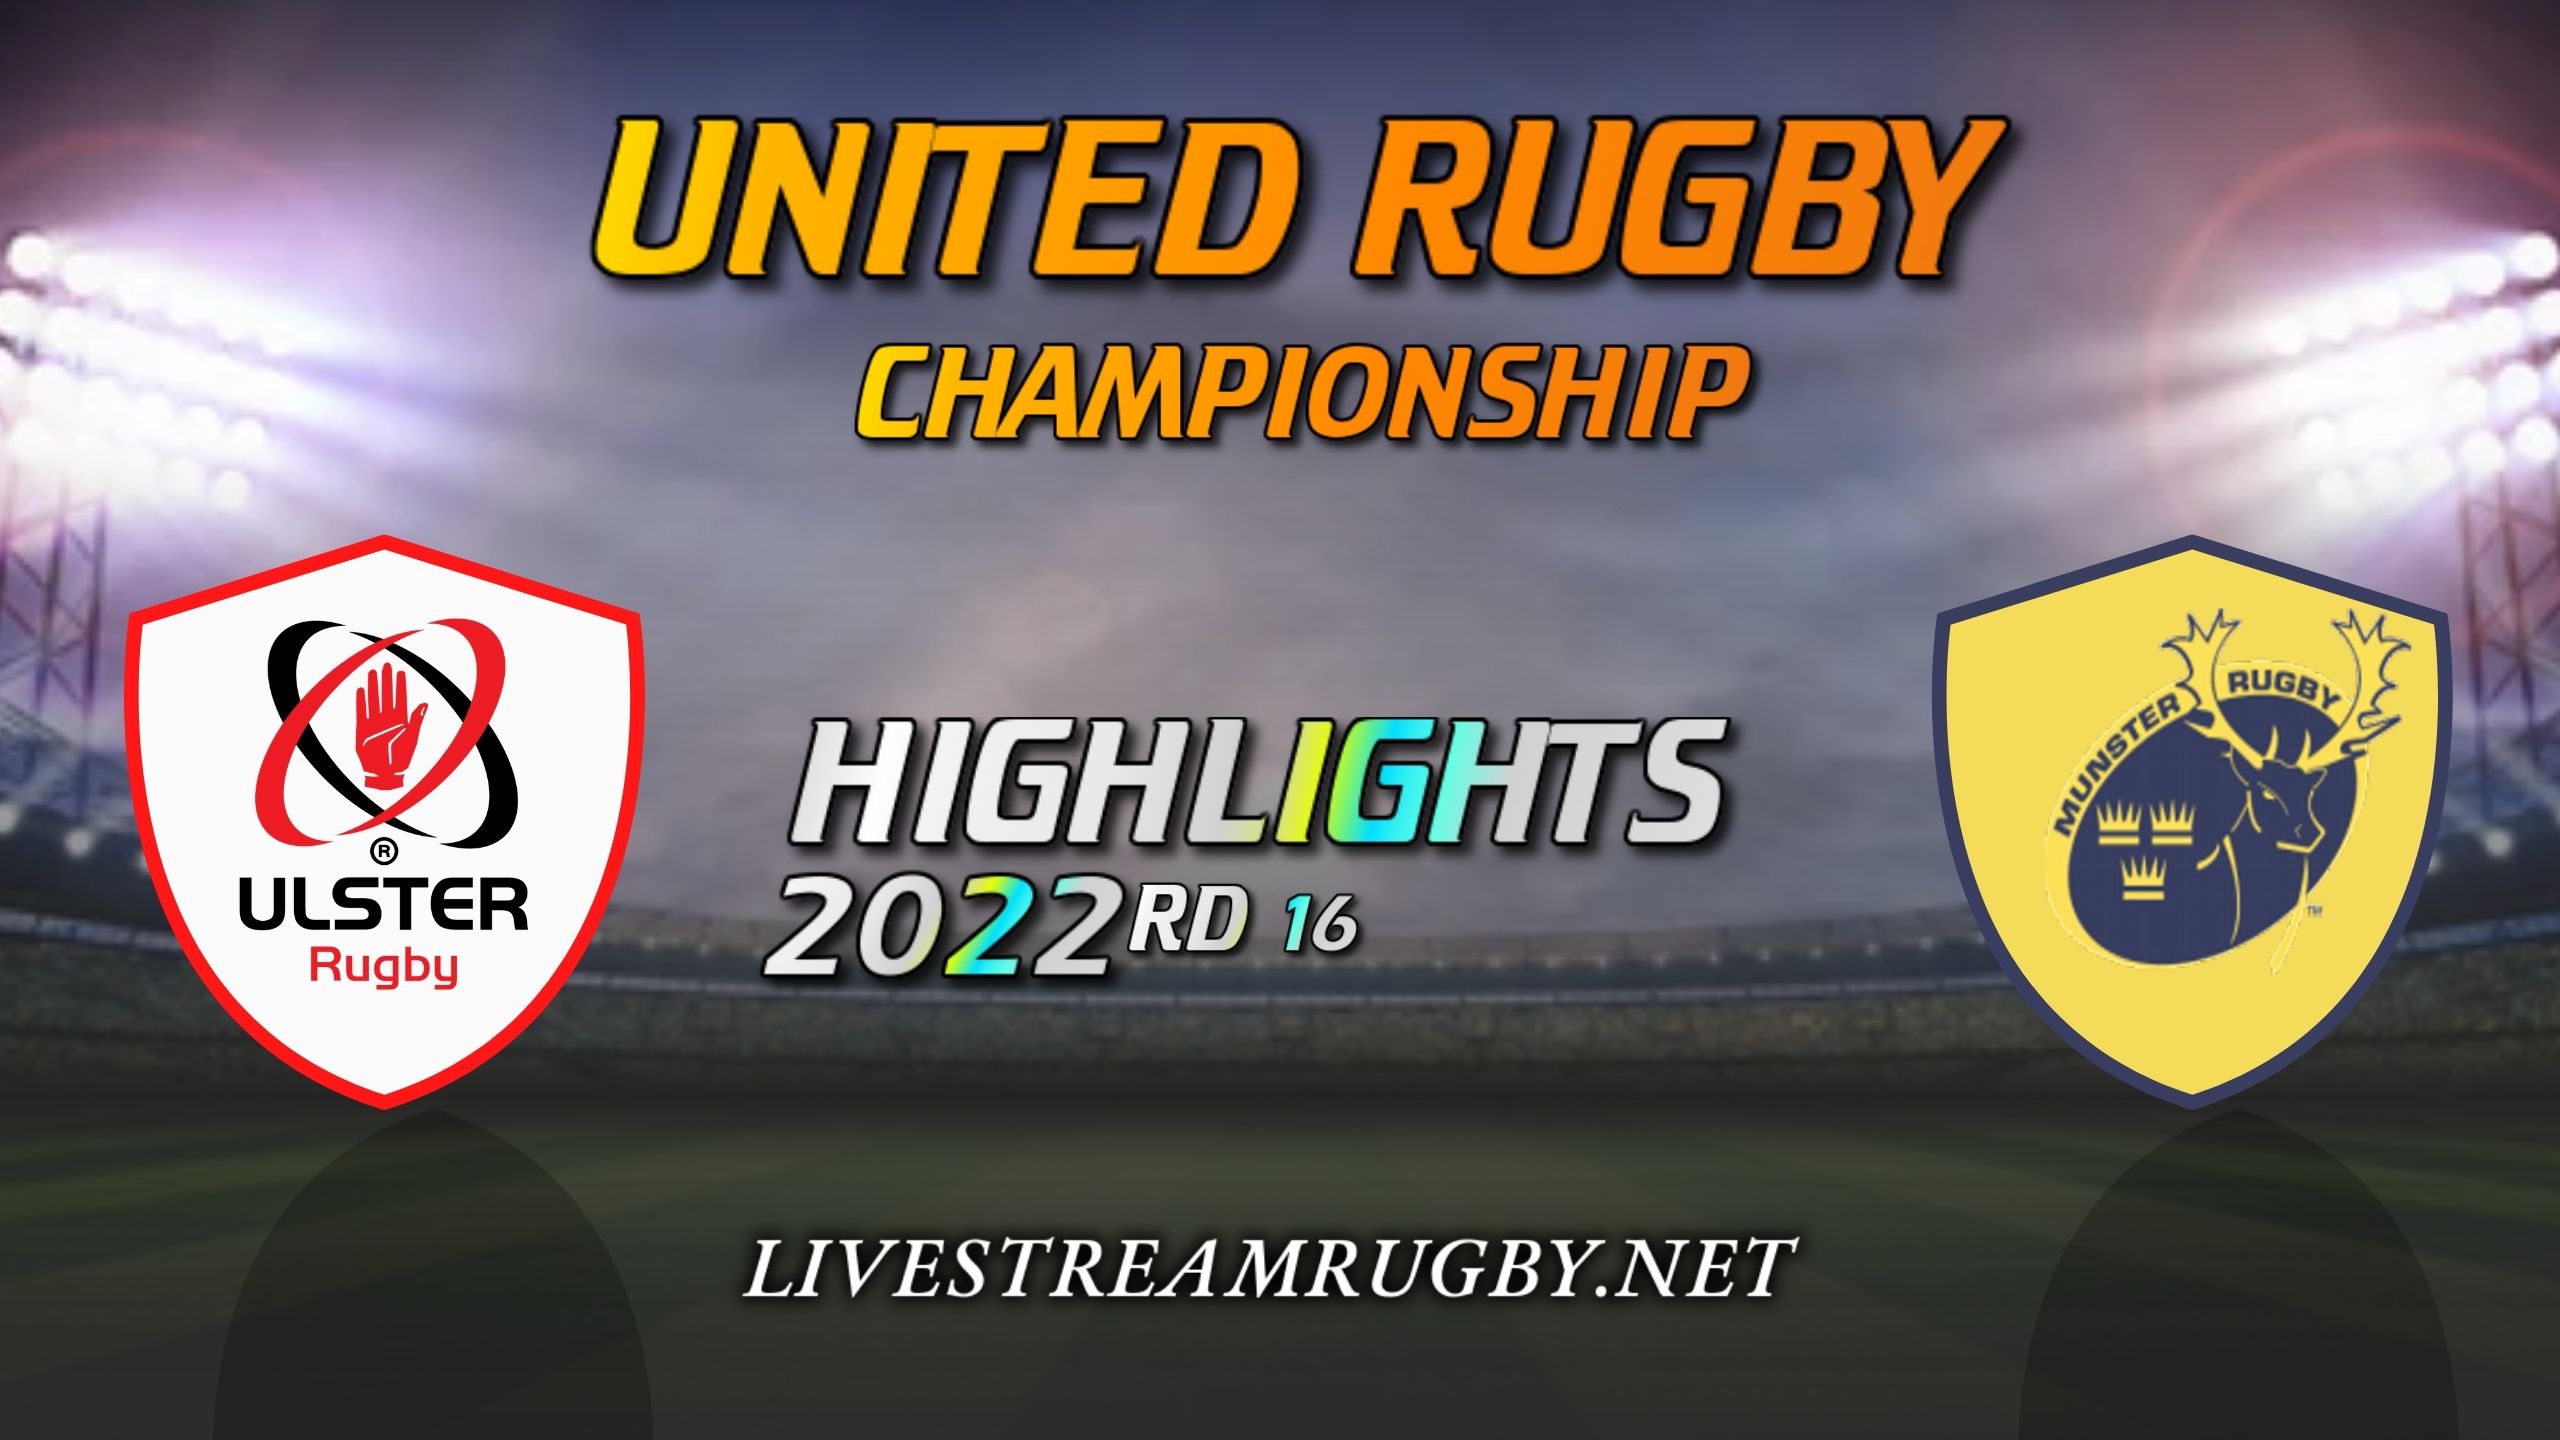 Ulster Vs Munster Highlights 2022 Rd 16 United Rugby